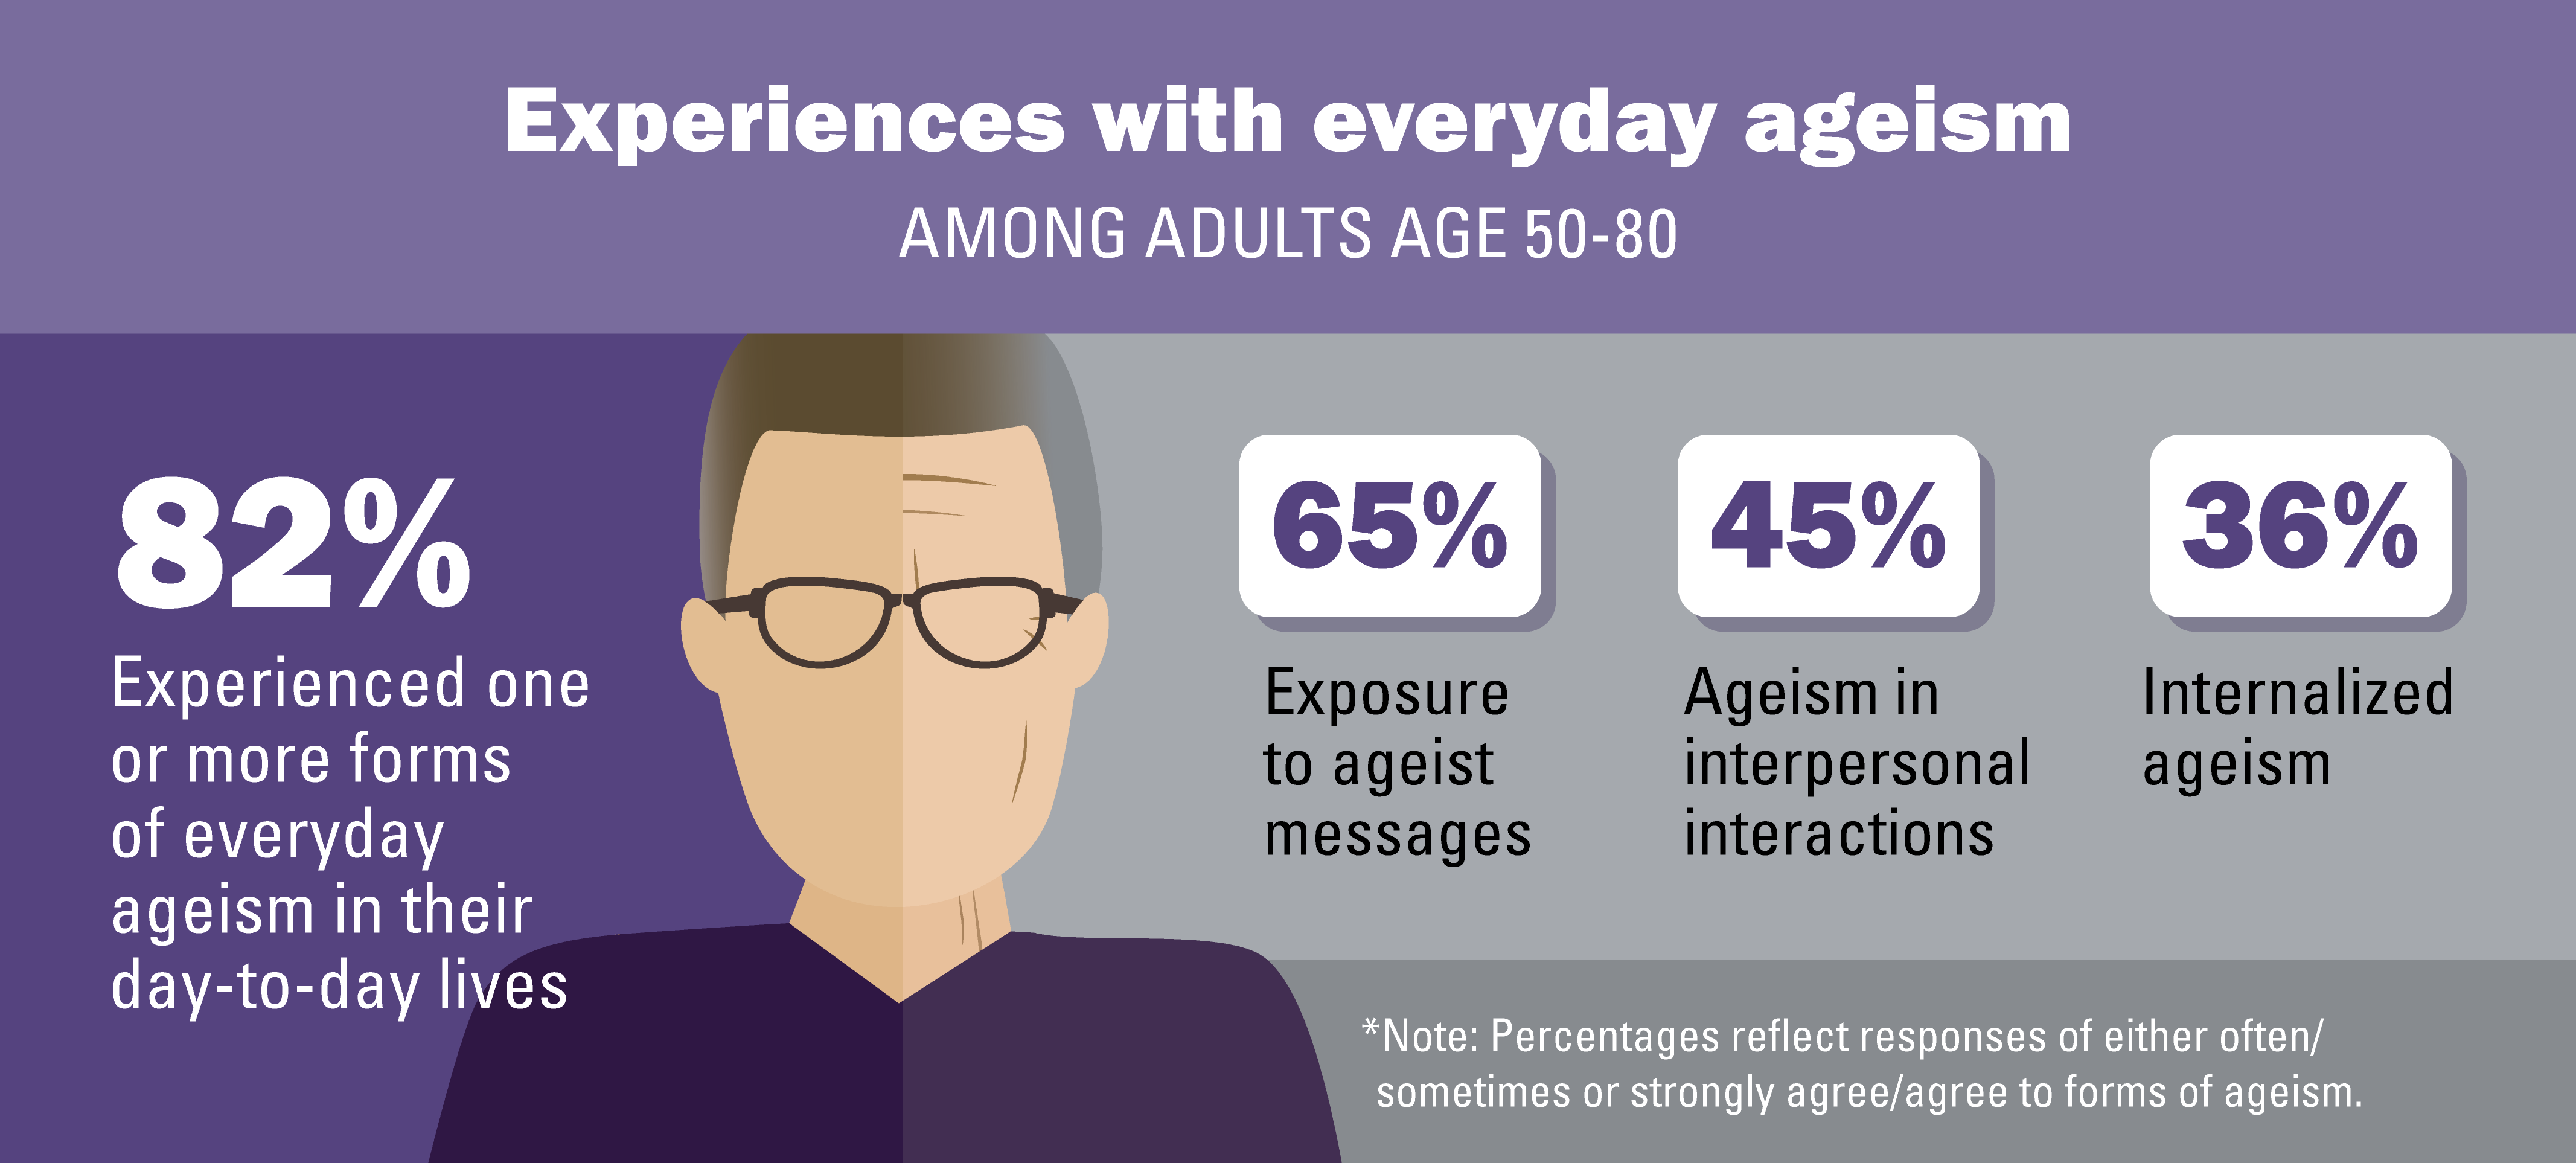 82% experienced one or more forms of everyday ageism in their day-to-day lives